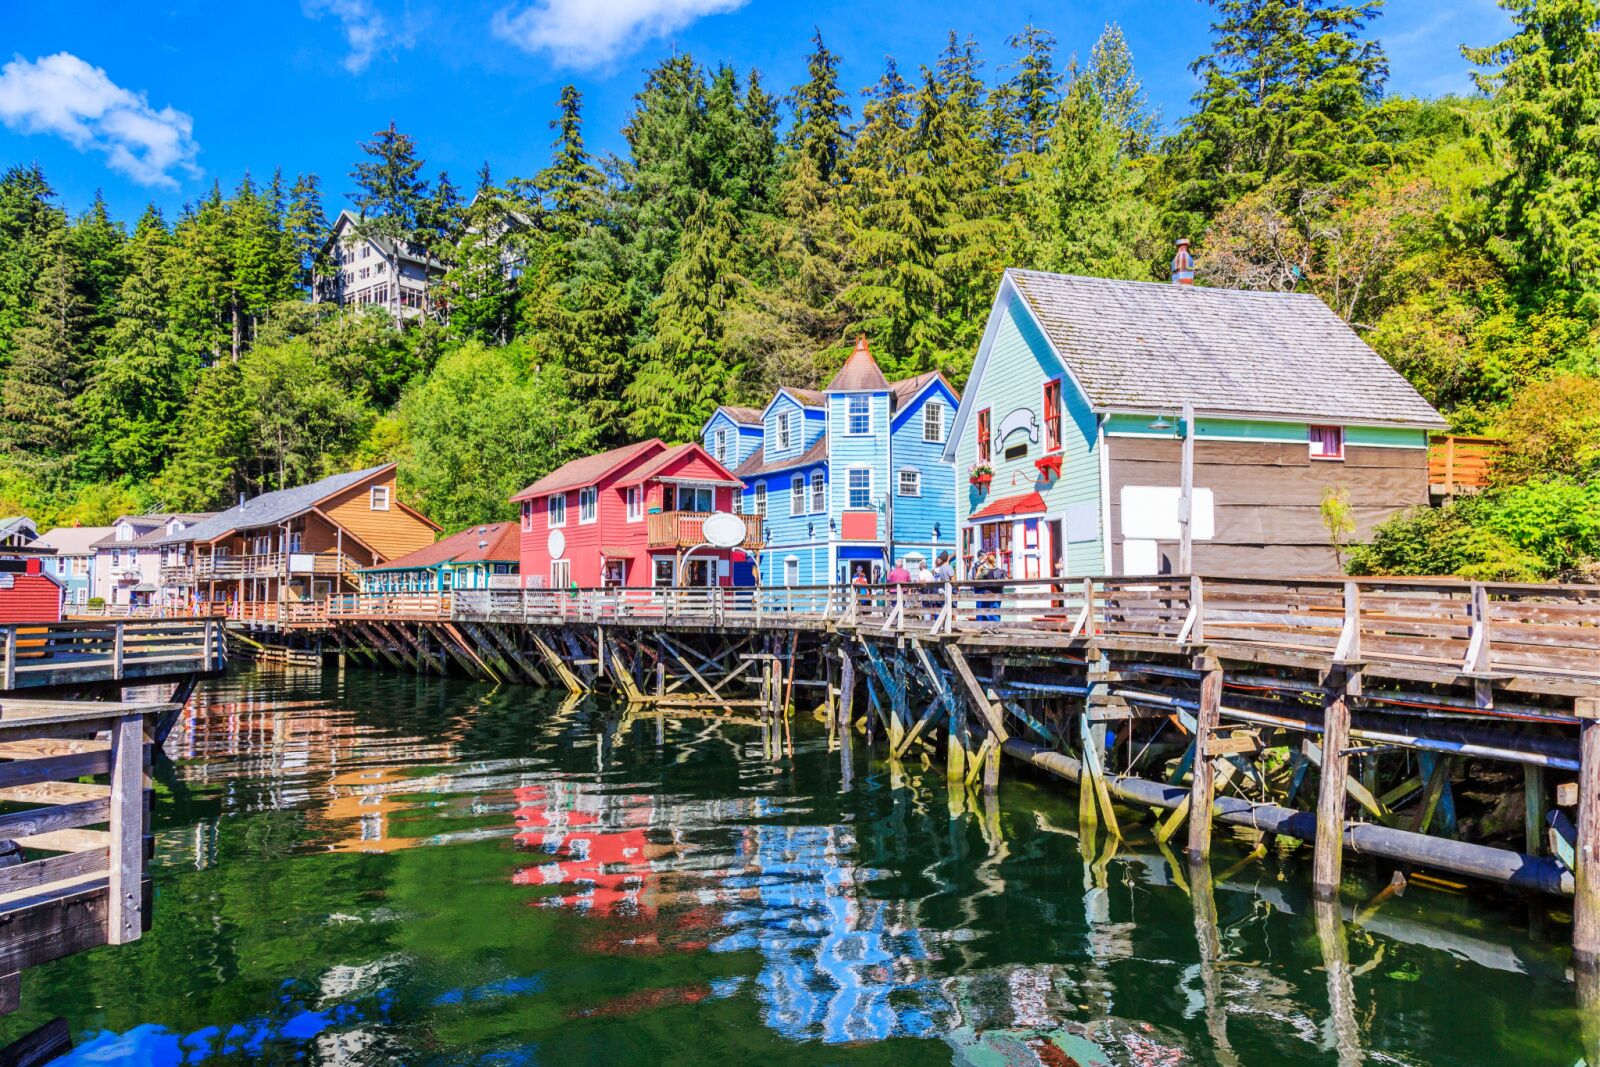 ketchikan alaska is best in the summer - colorful houses over water